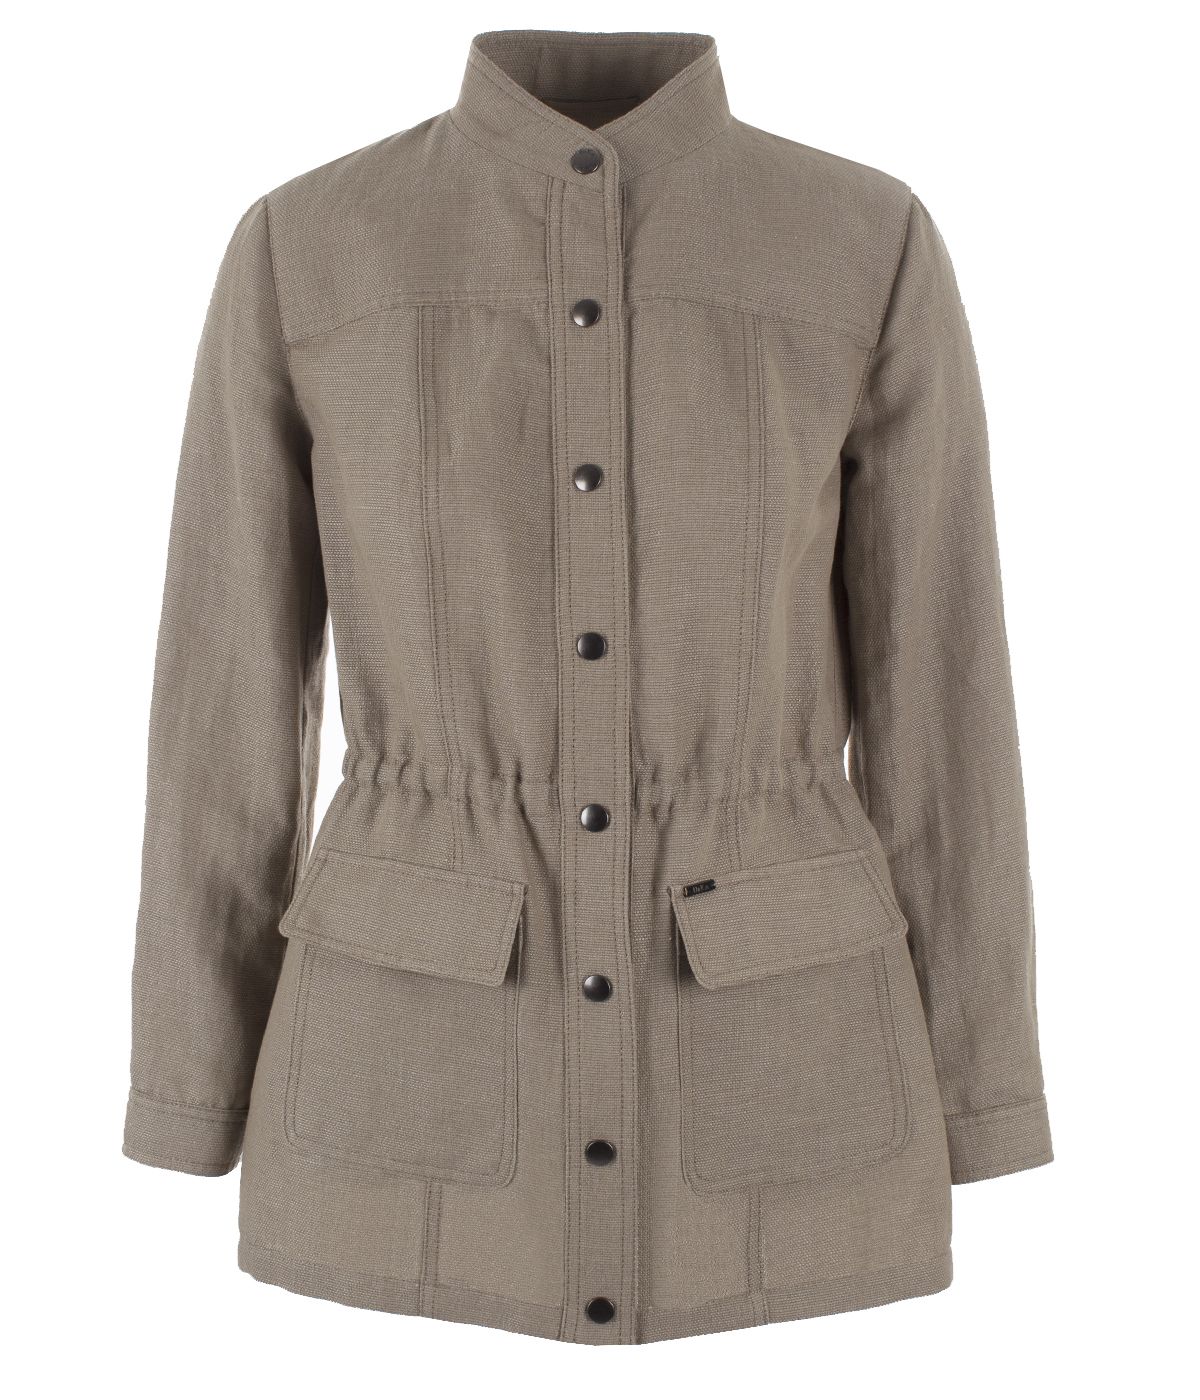 Casual linen and cotton jacket with press-studs and pockets with flaps 0